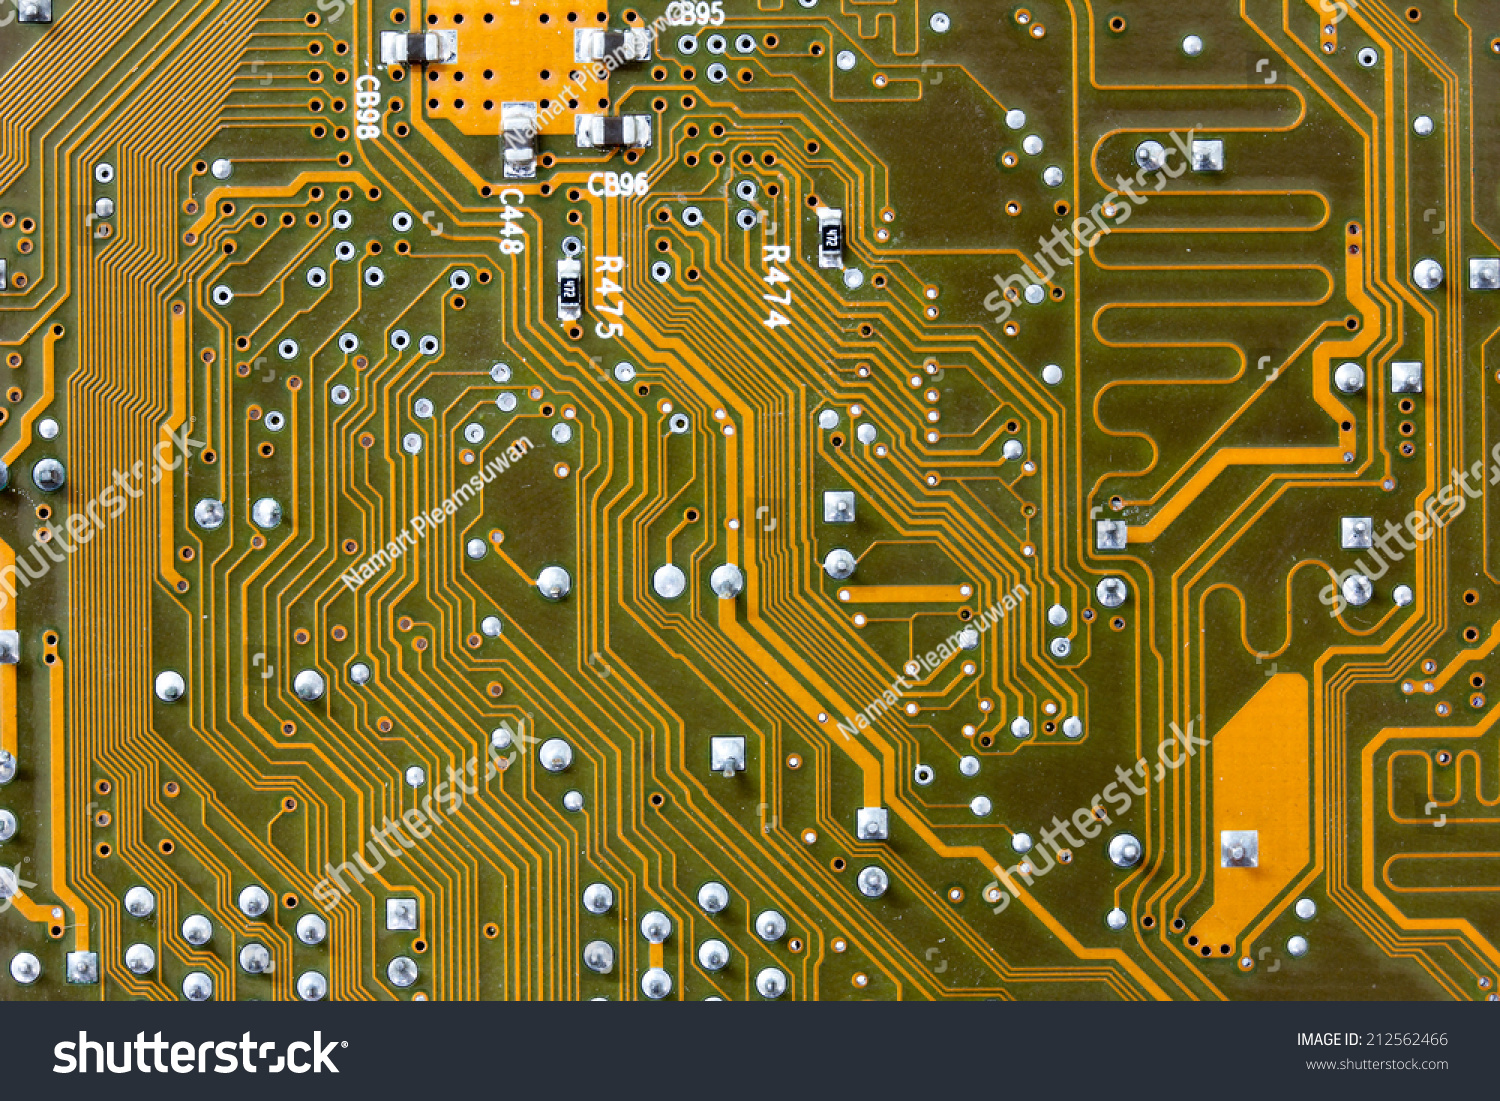 clipart motherboard - photo #30